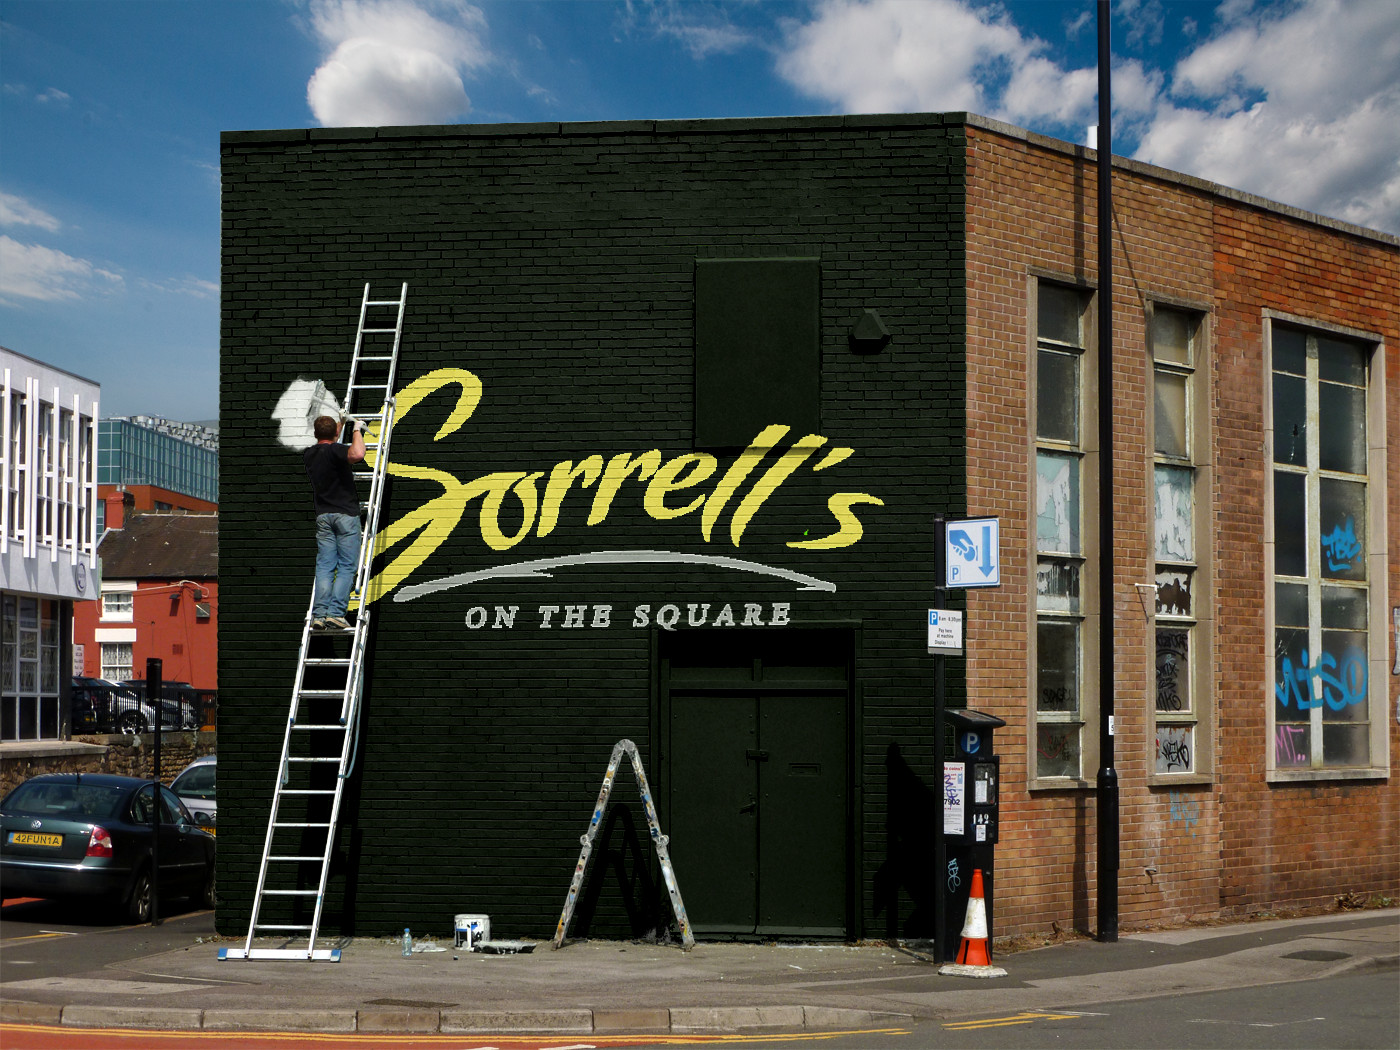 Building Ad for Sorrell's On The Square